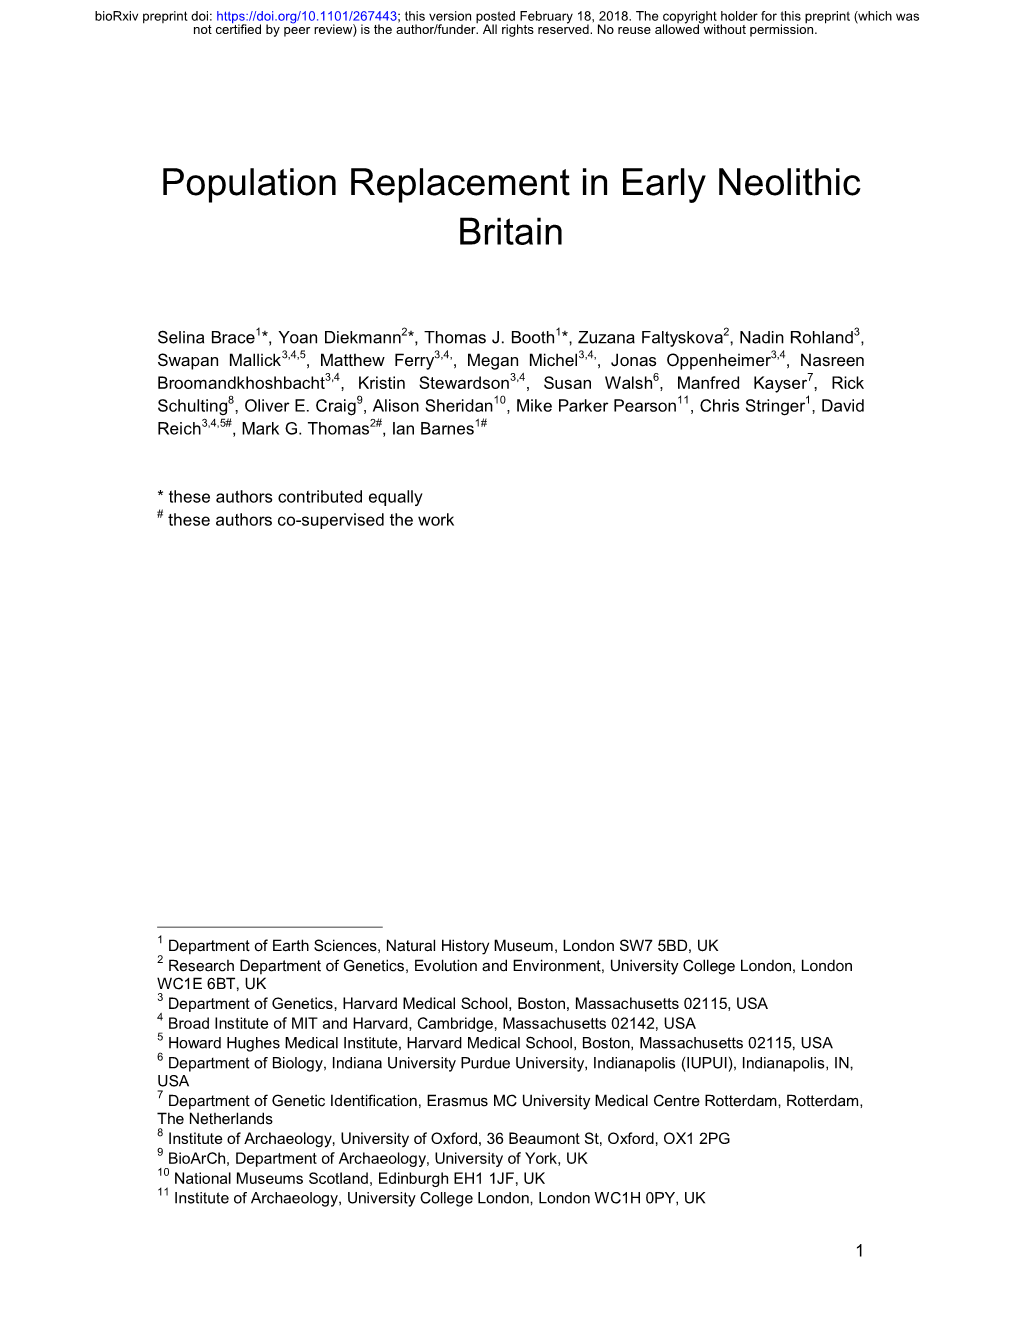 Population Replacement in Early Neolithic Britain